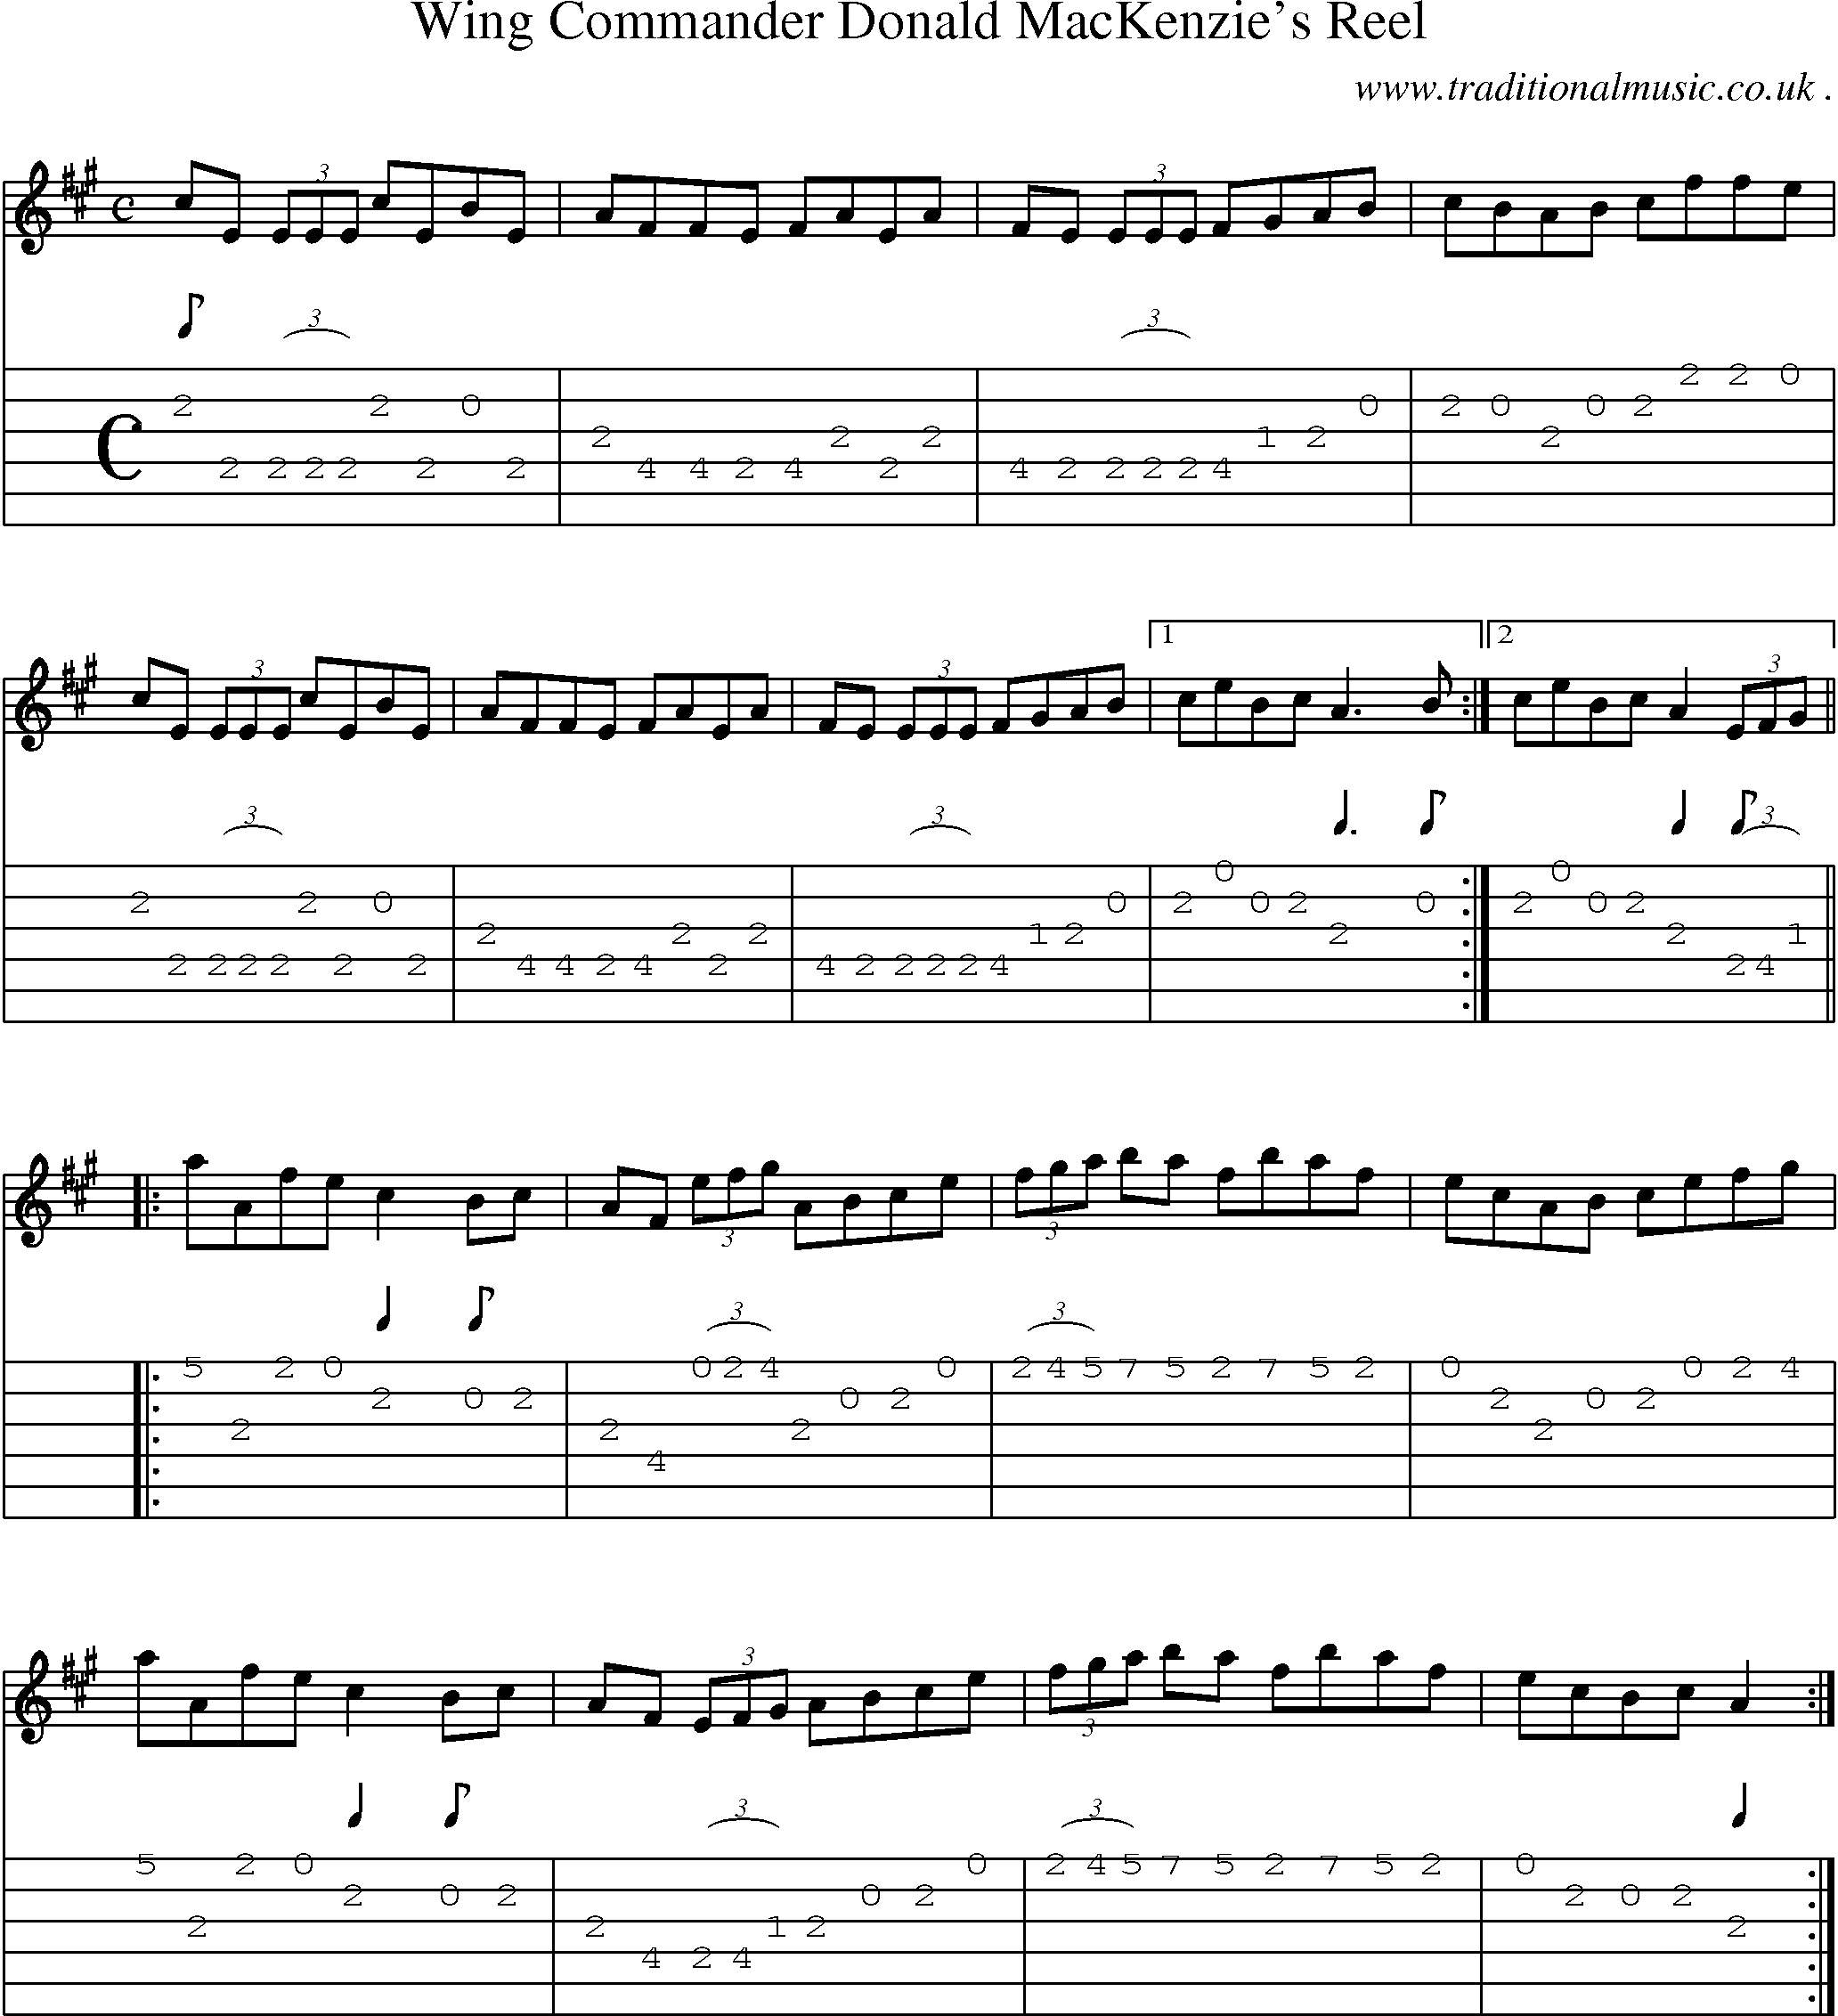 Sheet-music  score, Chords and Guitar Tabs for Wing Commander Donald Mackenzies Reel